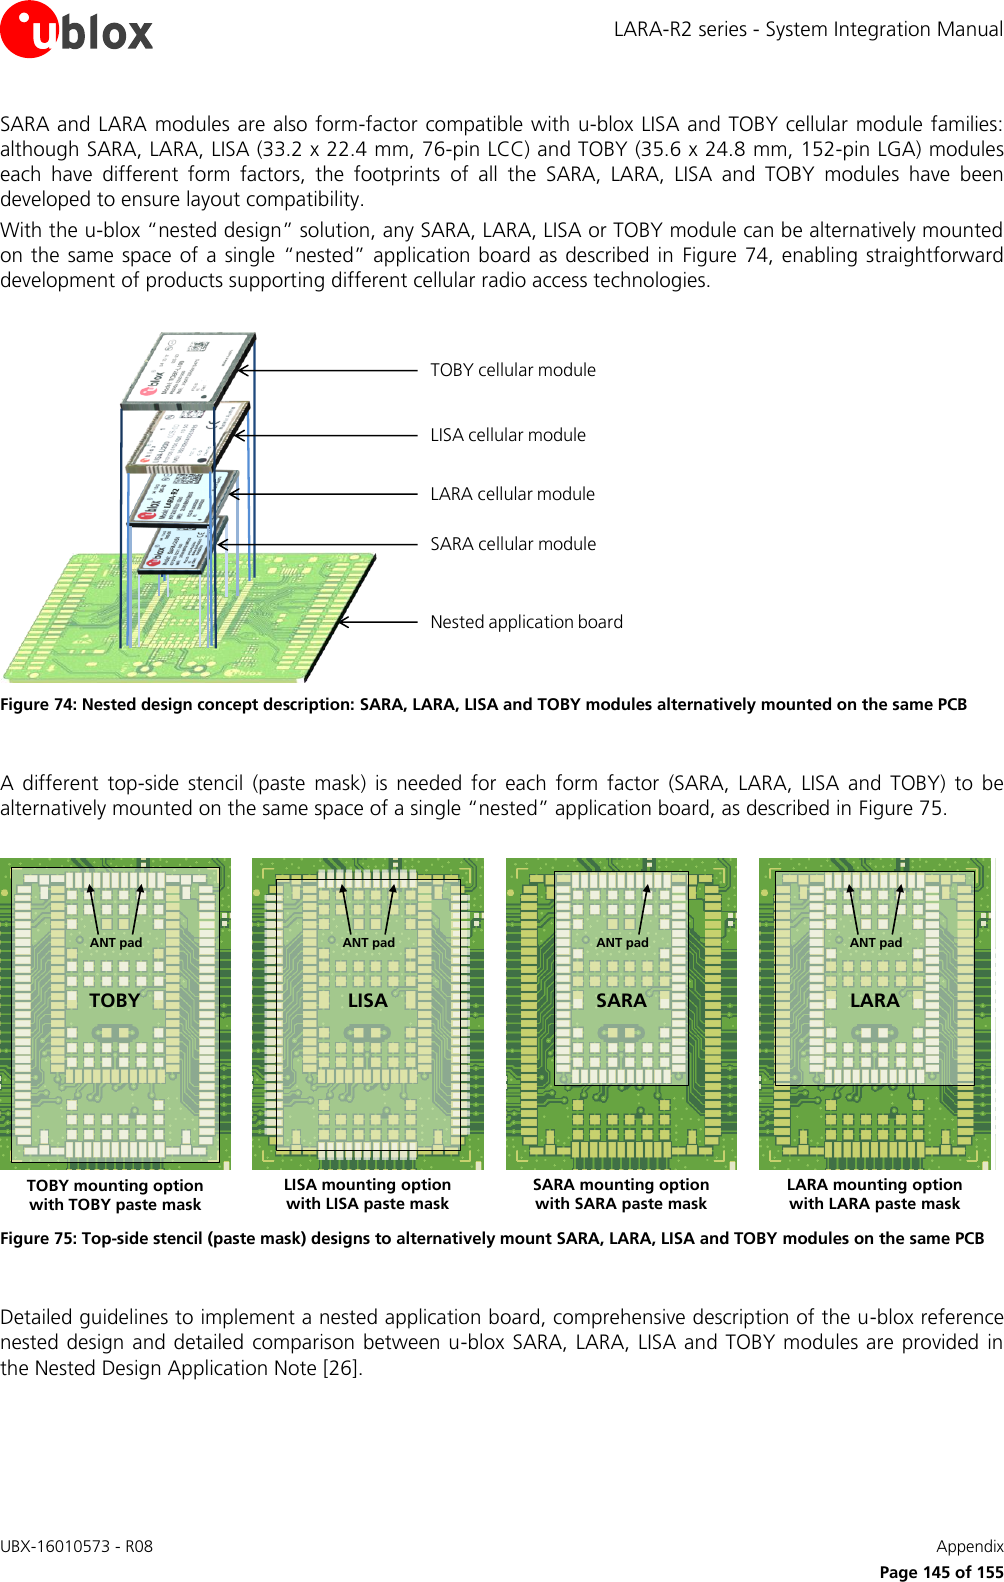 LARA-R2 series - System Integration Manual UBX-16010573 - R08    Appendix      Page 145 of 155 SARA and LARA modules are also form-factor compatible with u-blox LISA and TOBY cellular module families: although SARA, LARA, LISA (33.2 x 22.4 mm, 76-pin LCC) and TOBY (35.6 x 24.8 mm, 152-pin LGA) modules each  have  different  form  factors,  the  footprints  of  all  the  SARA,  LARA,  LISA  and  TOBY  modules  have  been developed to ensure layout compatibility. With the u-blox “nested design” solution, any SARA, LARA, LISA or TOBY module can be alternatively mounted on the  same space of  a  single “nested” application board as described  in  Figure 74,  enabling  straightforward development of products supporting different cellular radio access technologies.  LISA cellular moduleLARA cellular moduleSARA cellular moduleNested application boardTOBY cellular module Figure 74: Nested design concept description: SARA, LARA, LISA and TOBY modules alternatively mounted on the same PCB  A  different  top-side  stencil  (paste  mask)  is  needed  for  each  form  factor  (SARA,  LARA,  LISA  and  TOBY)  to  be alternatively mounted on the same space of a single “nested” application board, as described in Figure 75.  LISA mounting optionwith LISA paste maskANT padTOBY mounting optionwith TOBY paste maskANT padSARA mounting optionwith SARA paste maskANT pad ANT padLARA mounting optionwith LARA paste maskLISATOBY SARA LARA Figure 75: Top-side stencil (paste mask) designs to alternatively mount SARA, LARA, LISA and TOBY modules on the same PCB  Detailed guidelines to implement a nested application board, comprehensive description of the u-blox reference nested design and detailed comparison between u-blox SARA, LARA, LISA and TOBY modules are provided  in the Nested Design Application Note [26].   